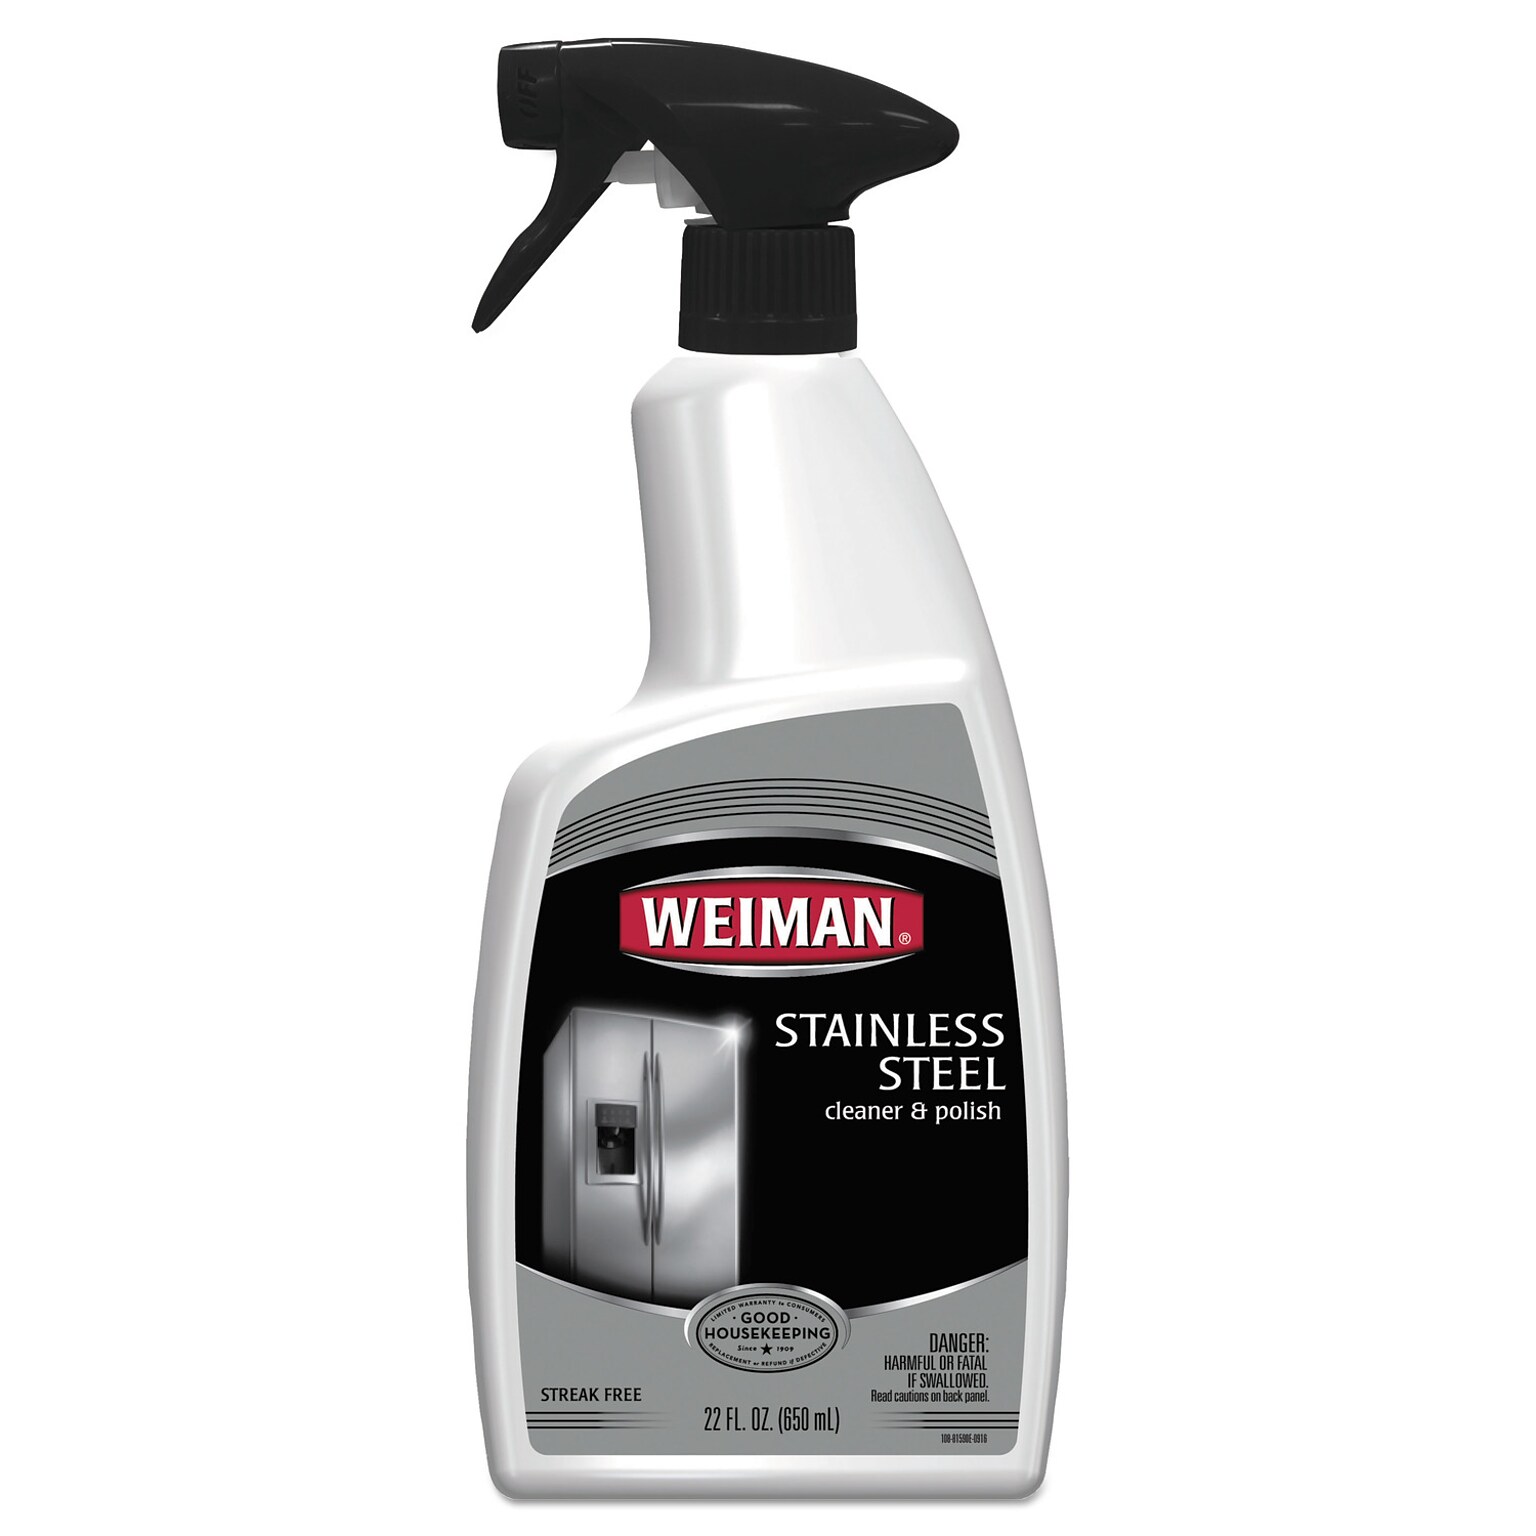 WEIMAN® Stainless Steel Cleaner and Polish, Floral Scent, 22 oz Trigger Spray Bottle